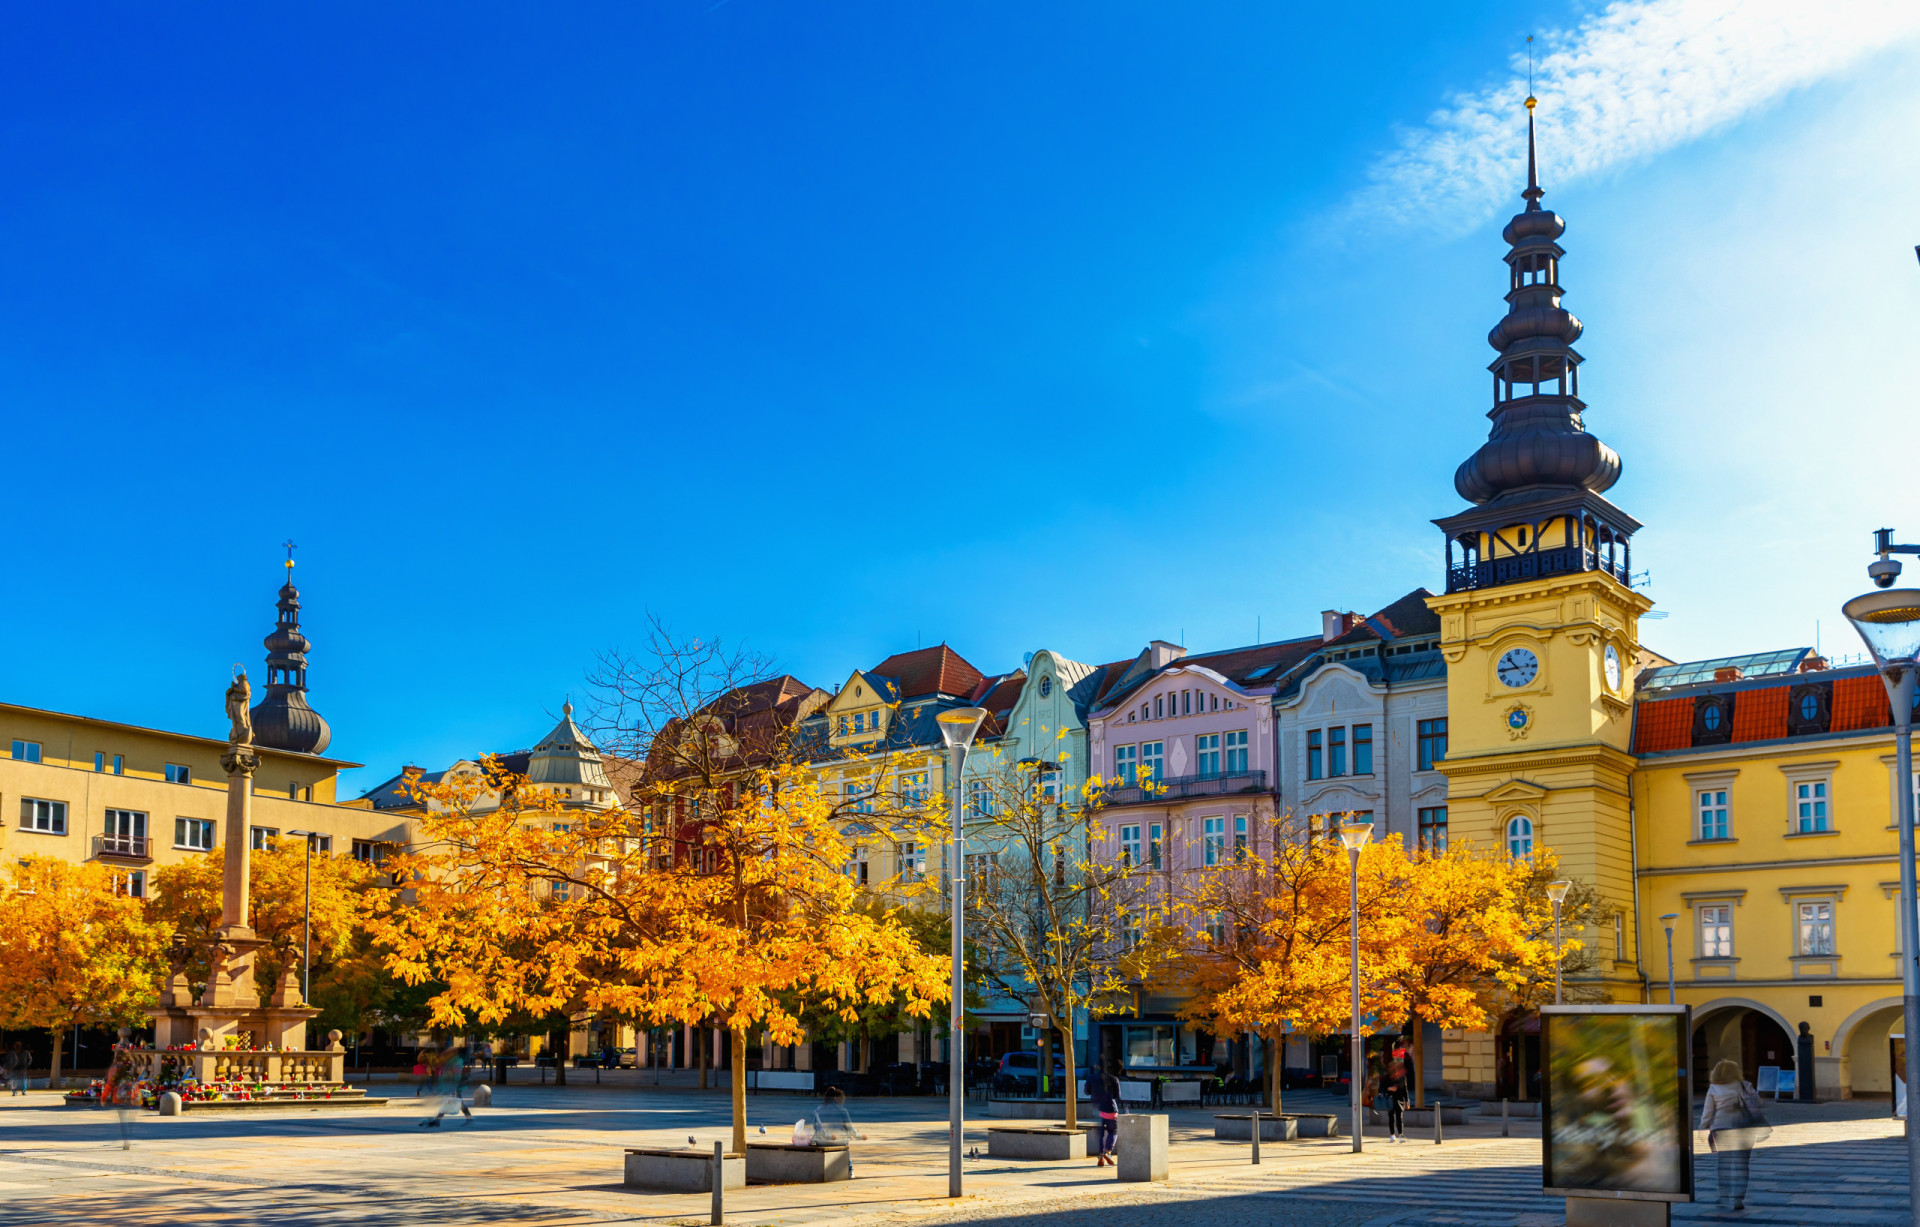 <p>Traveling to the third country, the Czech Republic, would take another hour of your time. If the 2022 Swedish record breakers are anything to go by, you would need to drive to Ostrava Airport and charter a private plane, which you would use to visit quite a few countries in a row!</p><p><a href="https://www.msn.com/en-us/community/channel/vid-7xx8mnucu55yw63we9va2gwr7uihbxwc68fxqp25x6tg4ftibpra?cvid=94631541bc0f4f89bfd59158d696ad7e">Follow us and access great exclusive content every day</a></p>